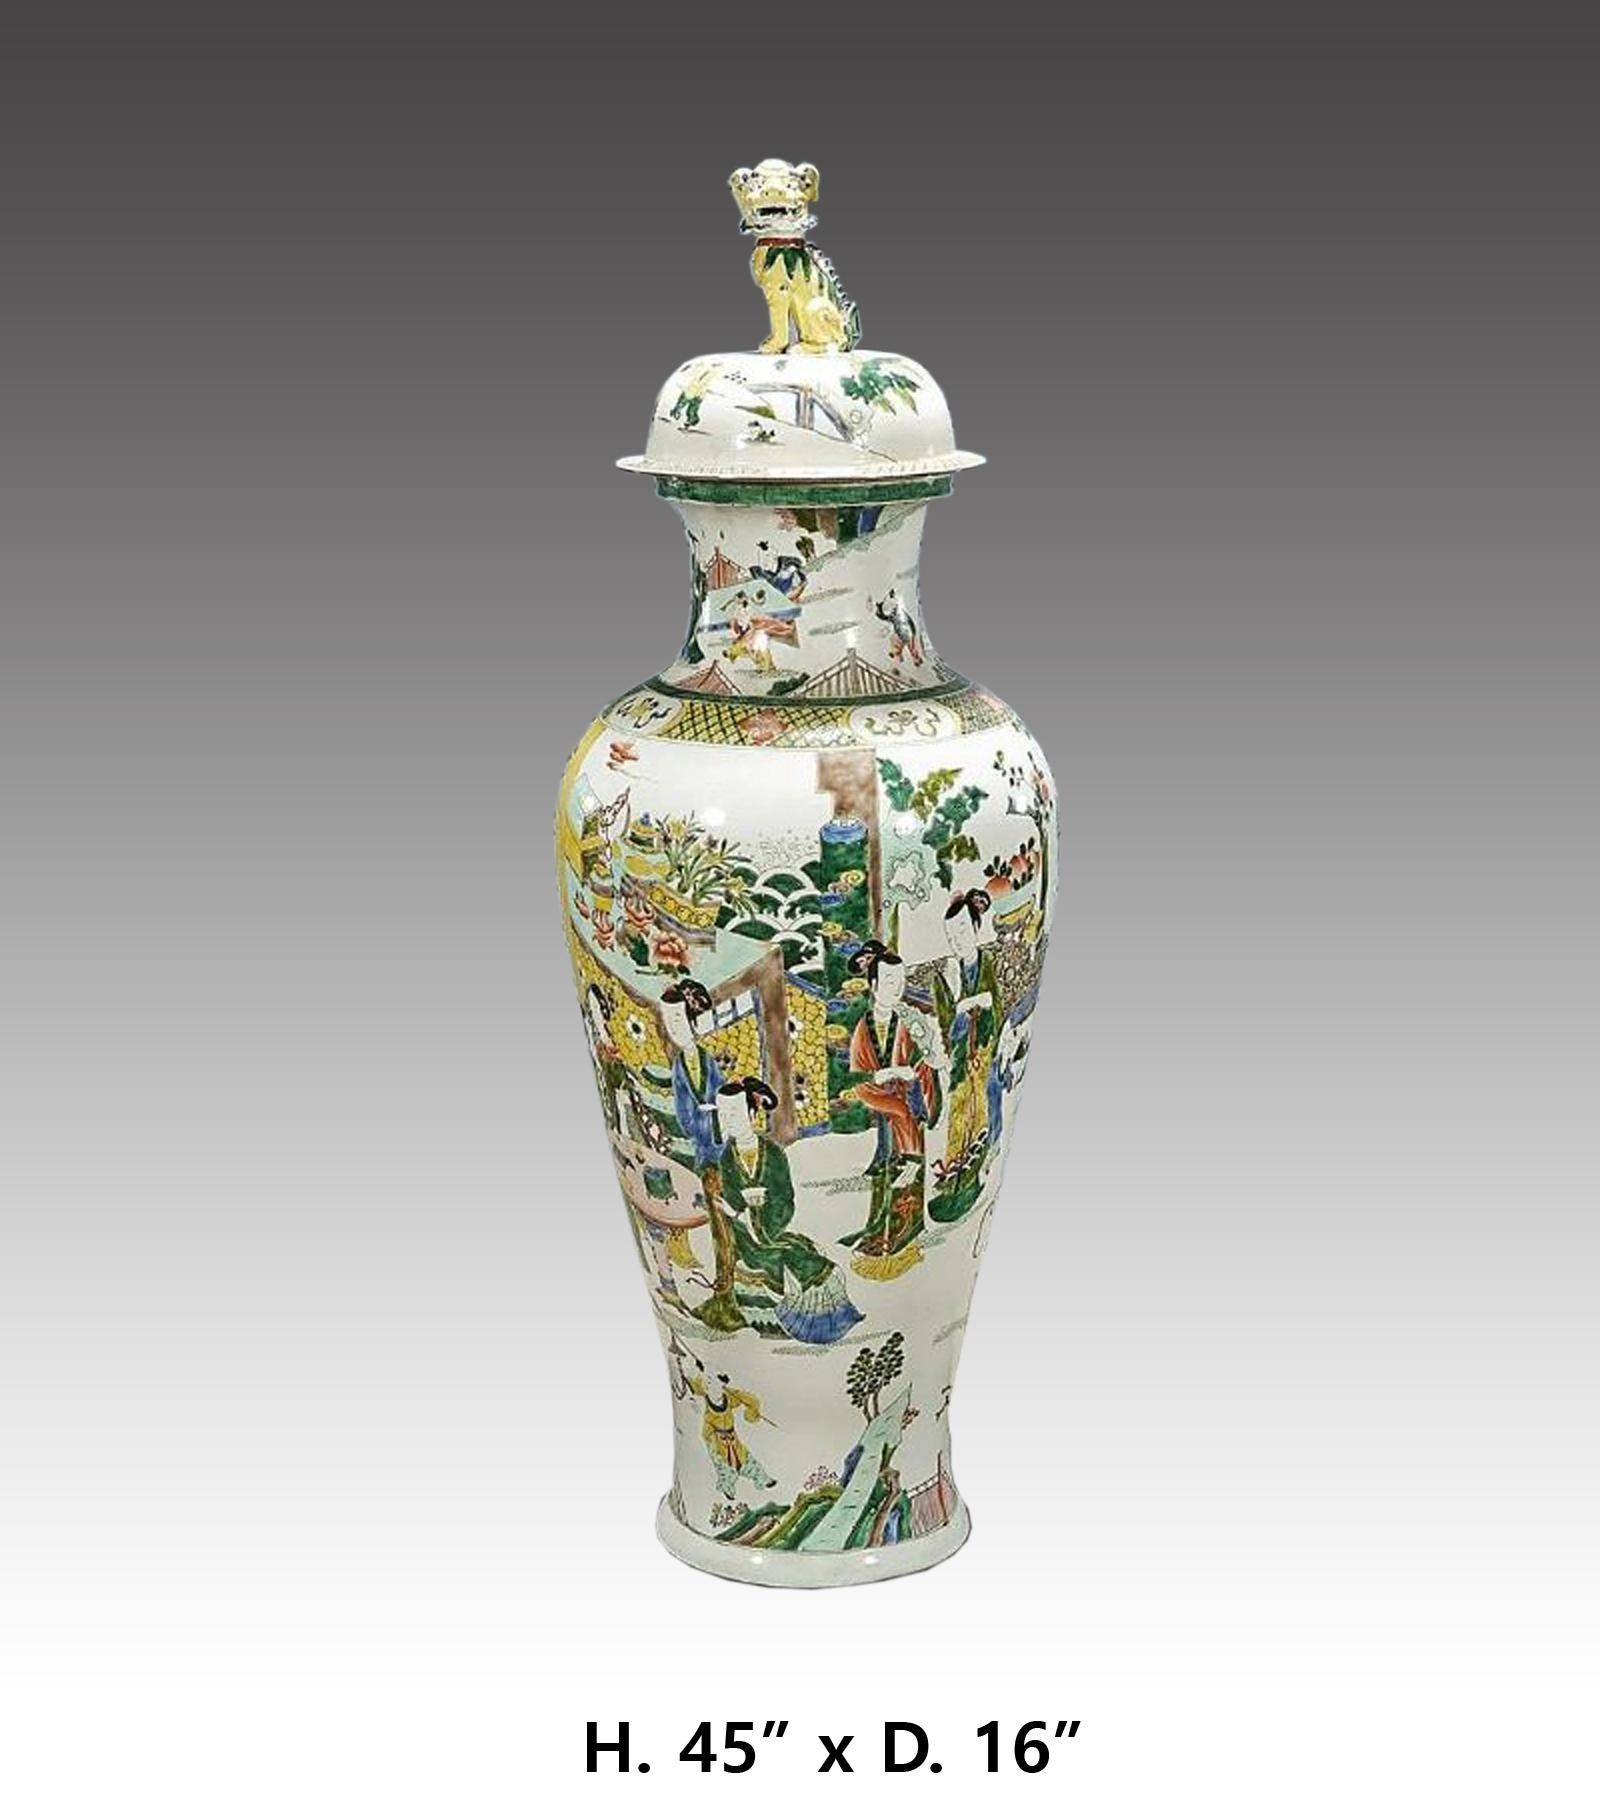 Elaborate Chinese hand painted porcelain covered vase, depicting various scenes of children and other figures.
Measures: H.45